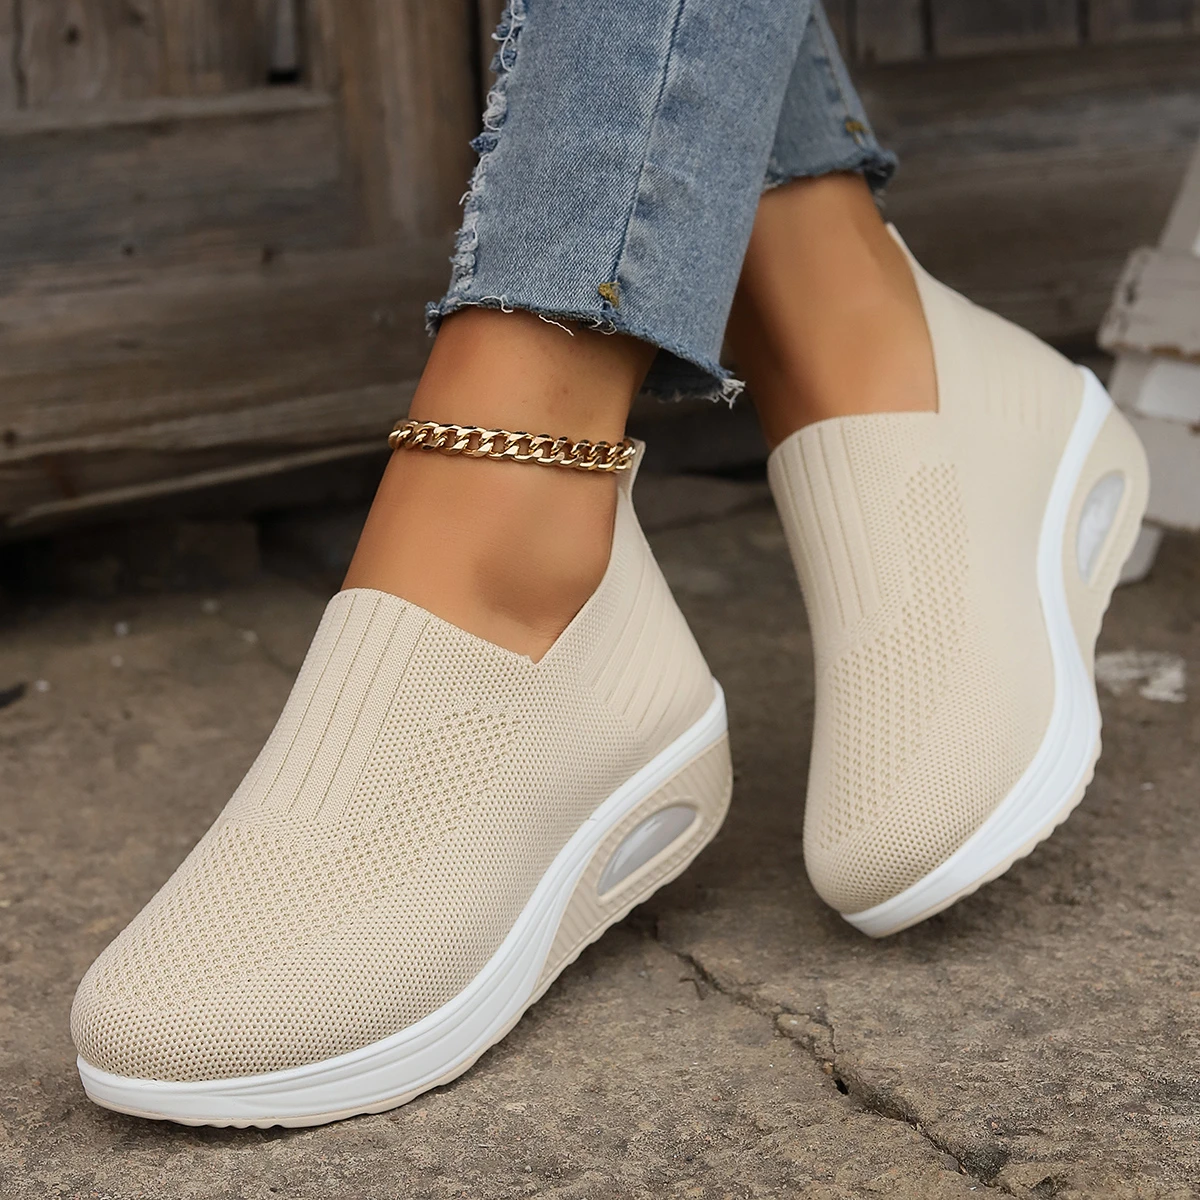 

2024Summe women's fashion vulcanized shoes platform solid color flat women's shoes casual breathable wedge heel walking sneakers